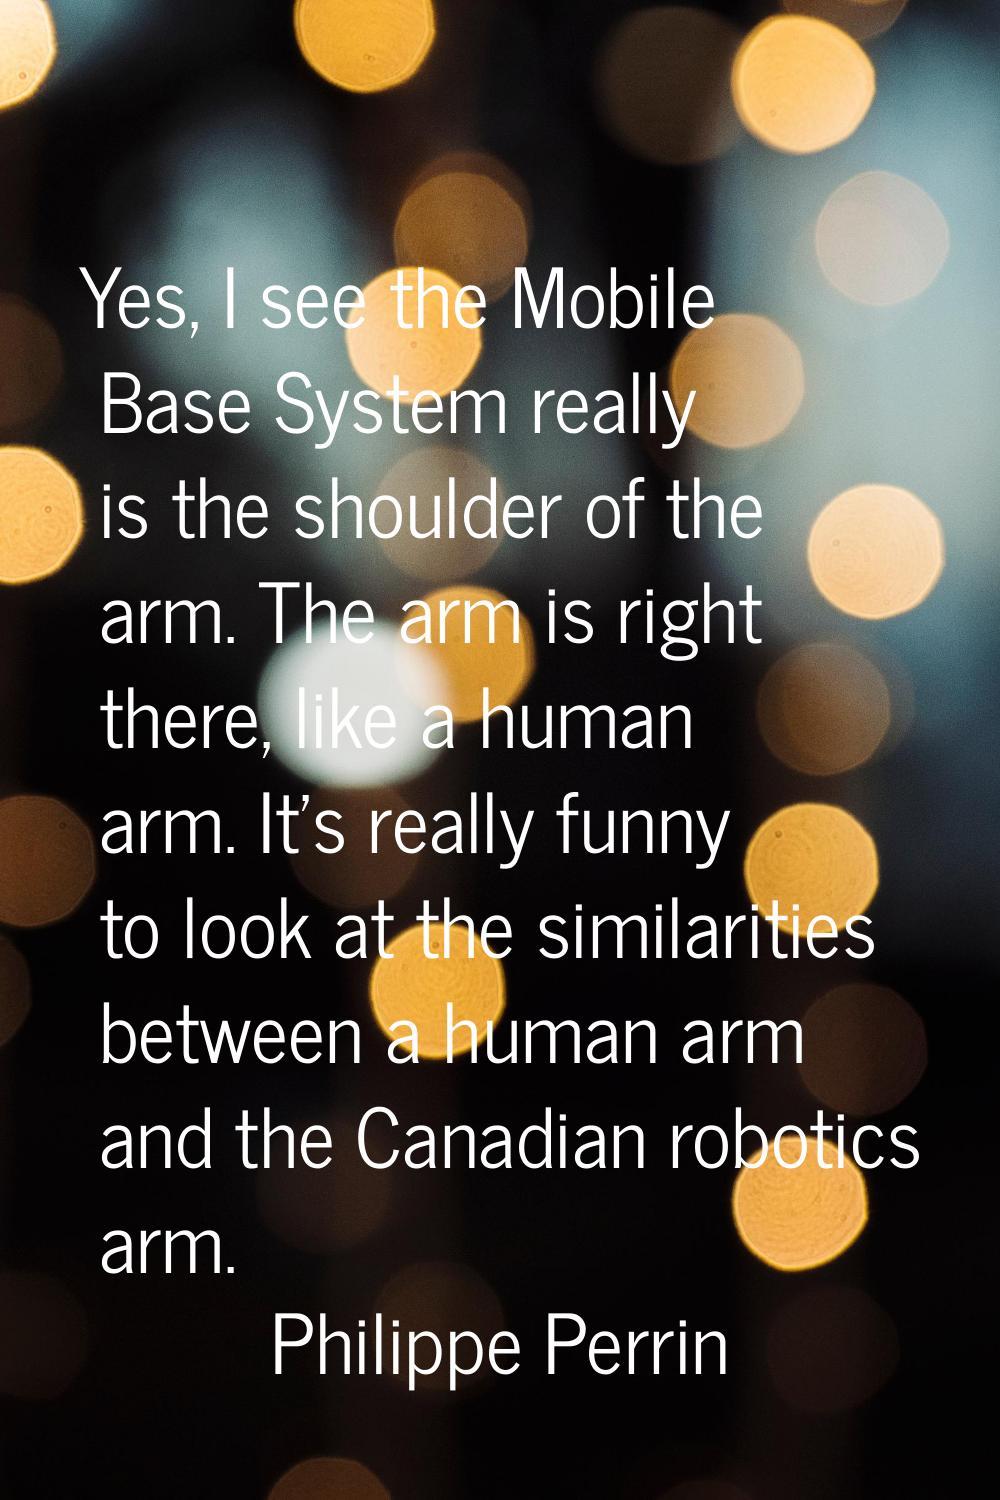 Yes, I see the Mobile Base System really is the shoulder of the arm. The arm is right there, like a